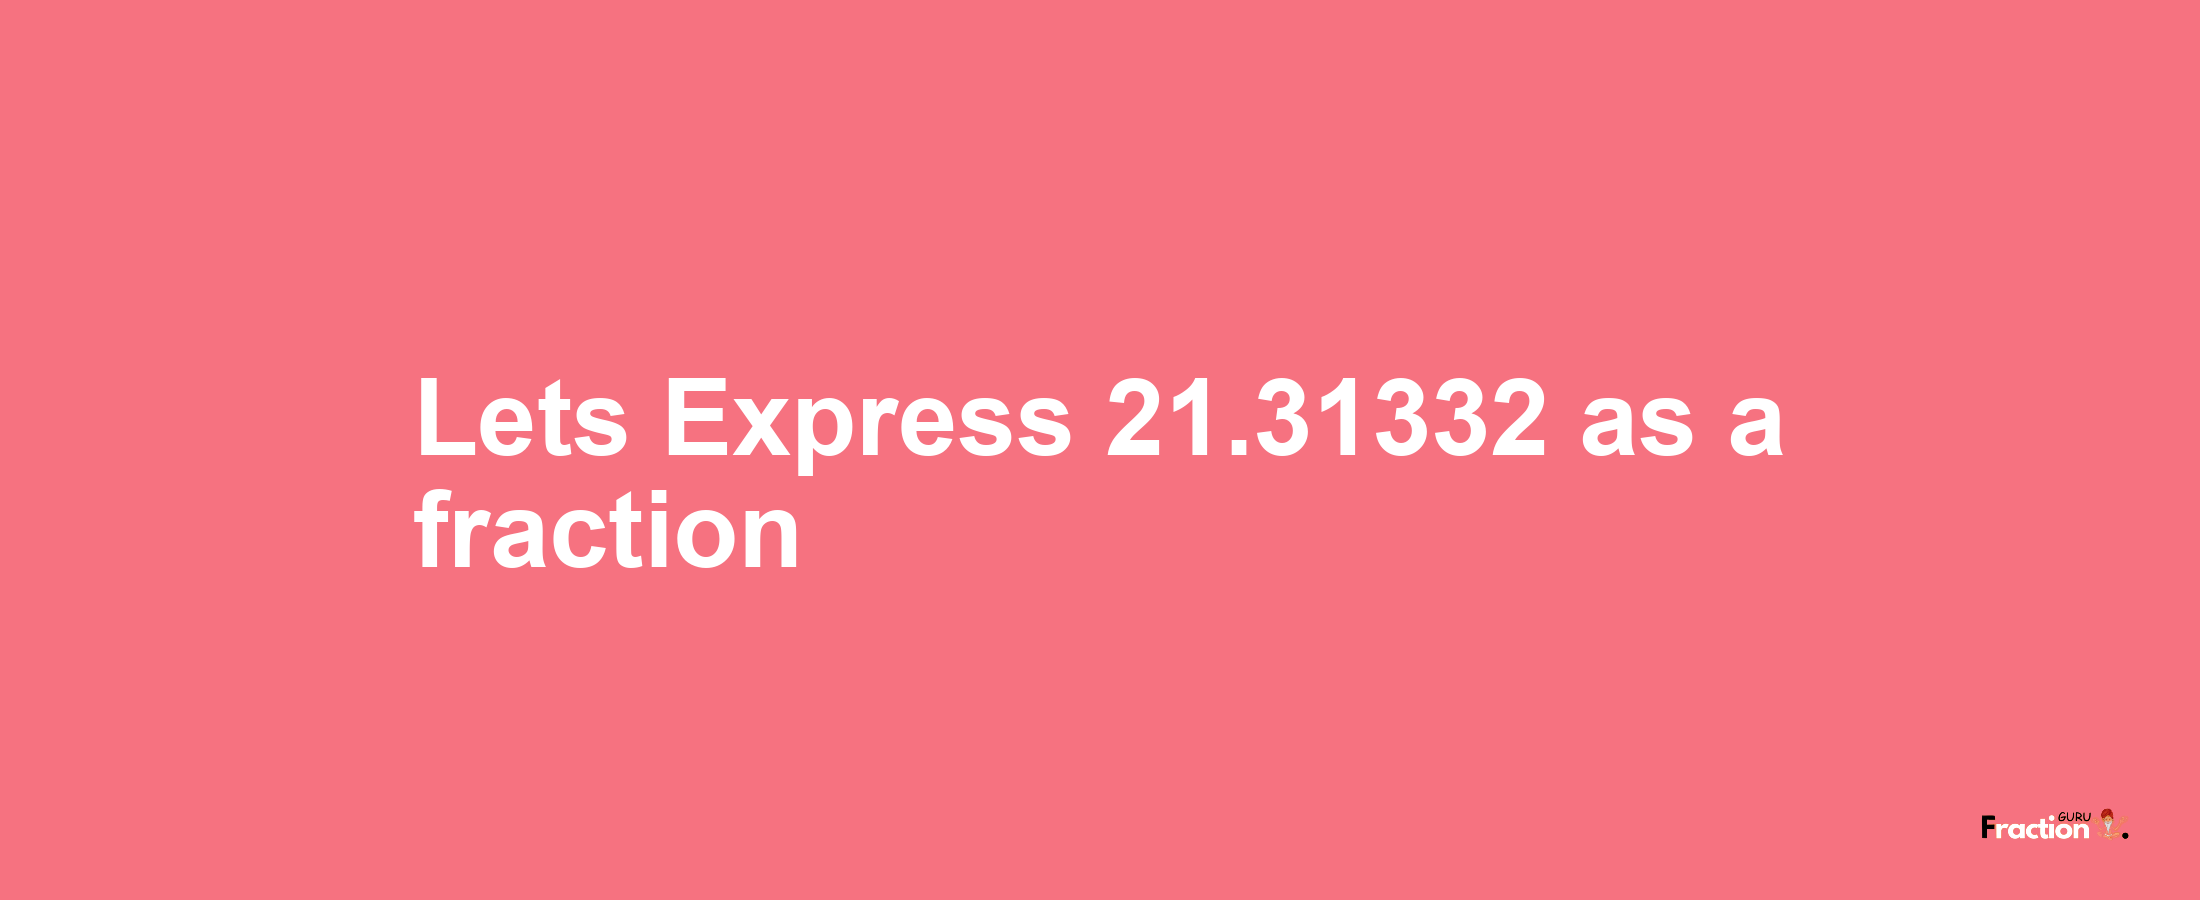 Lets Express 21.31332 as afraction